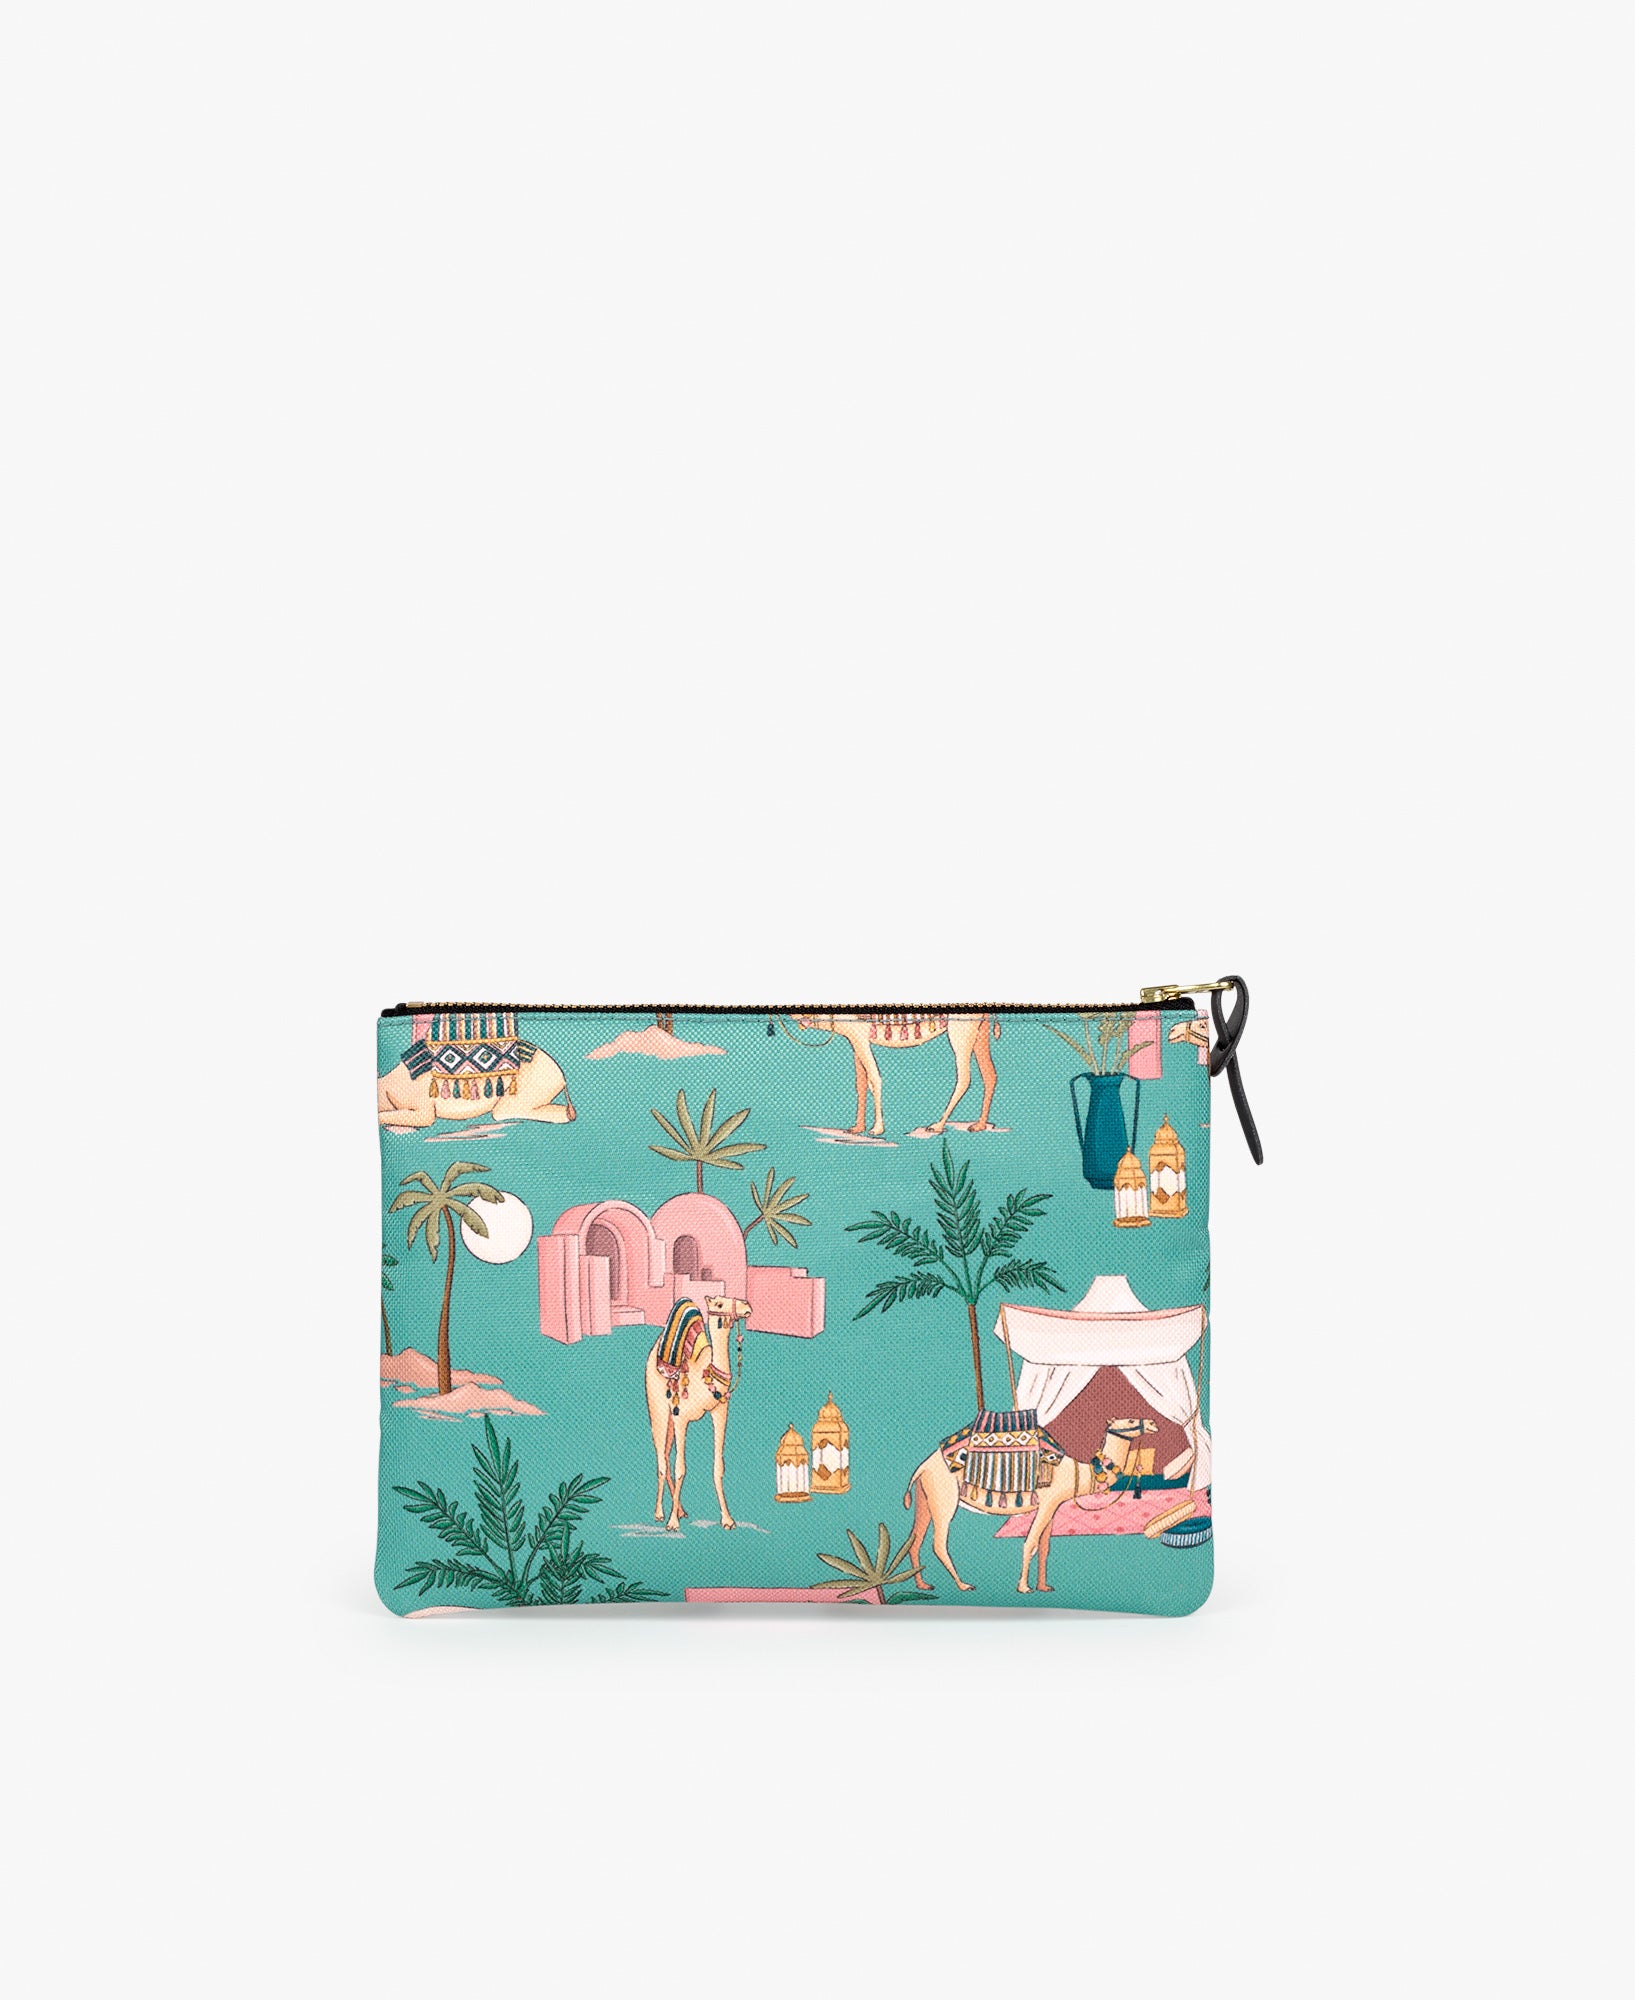 WOUF Sahara Large Pouch